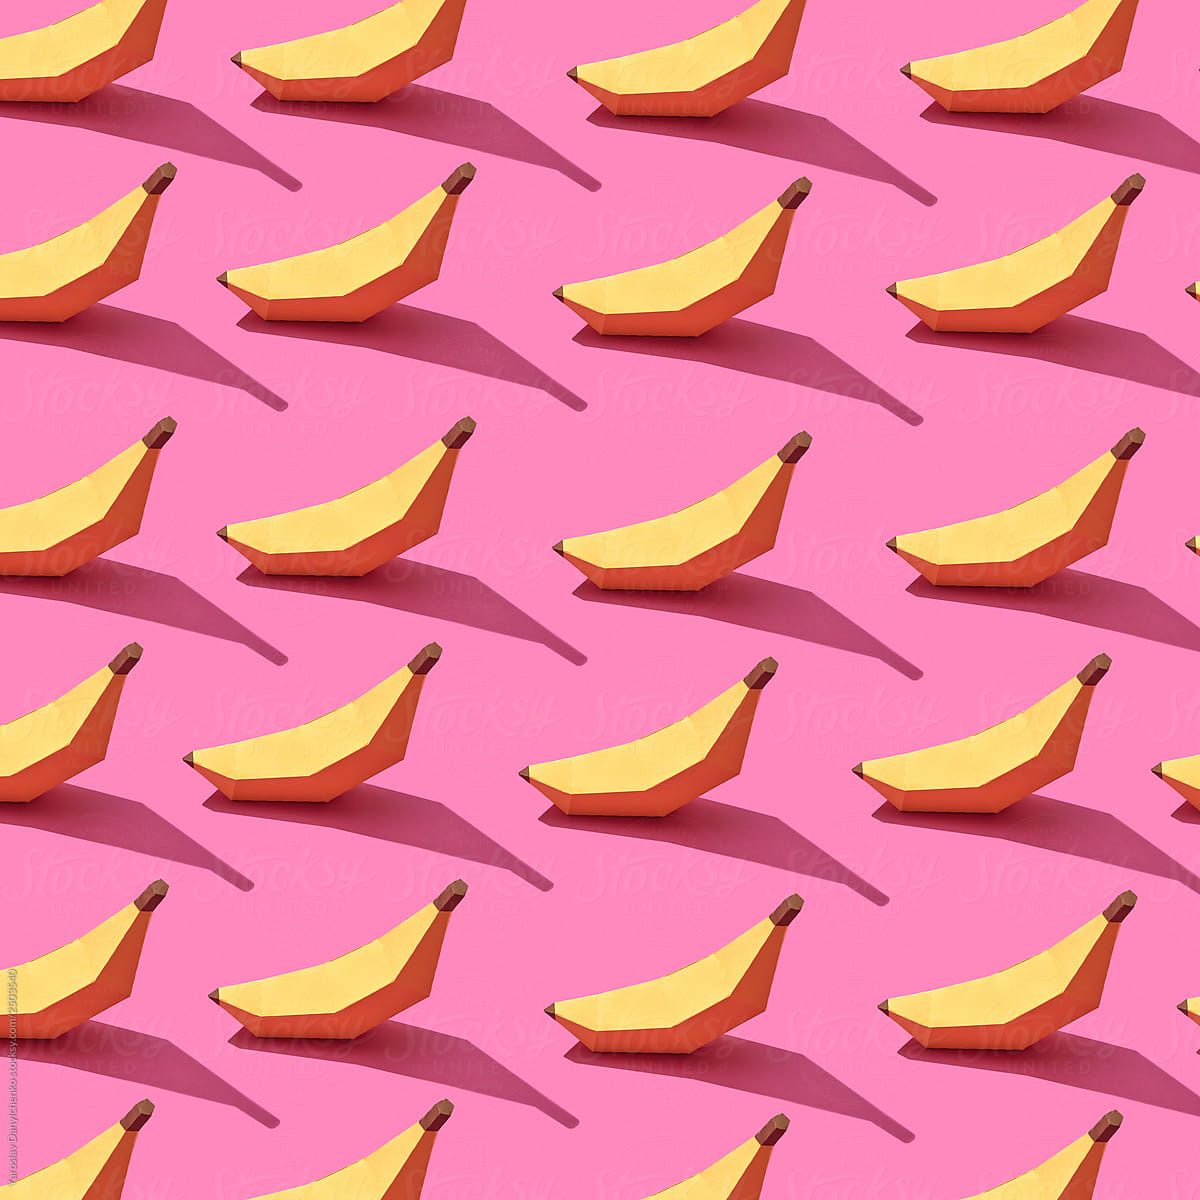 Handcraft paper bananas on a pink background